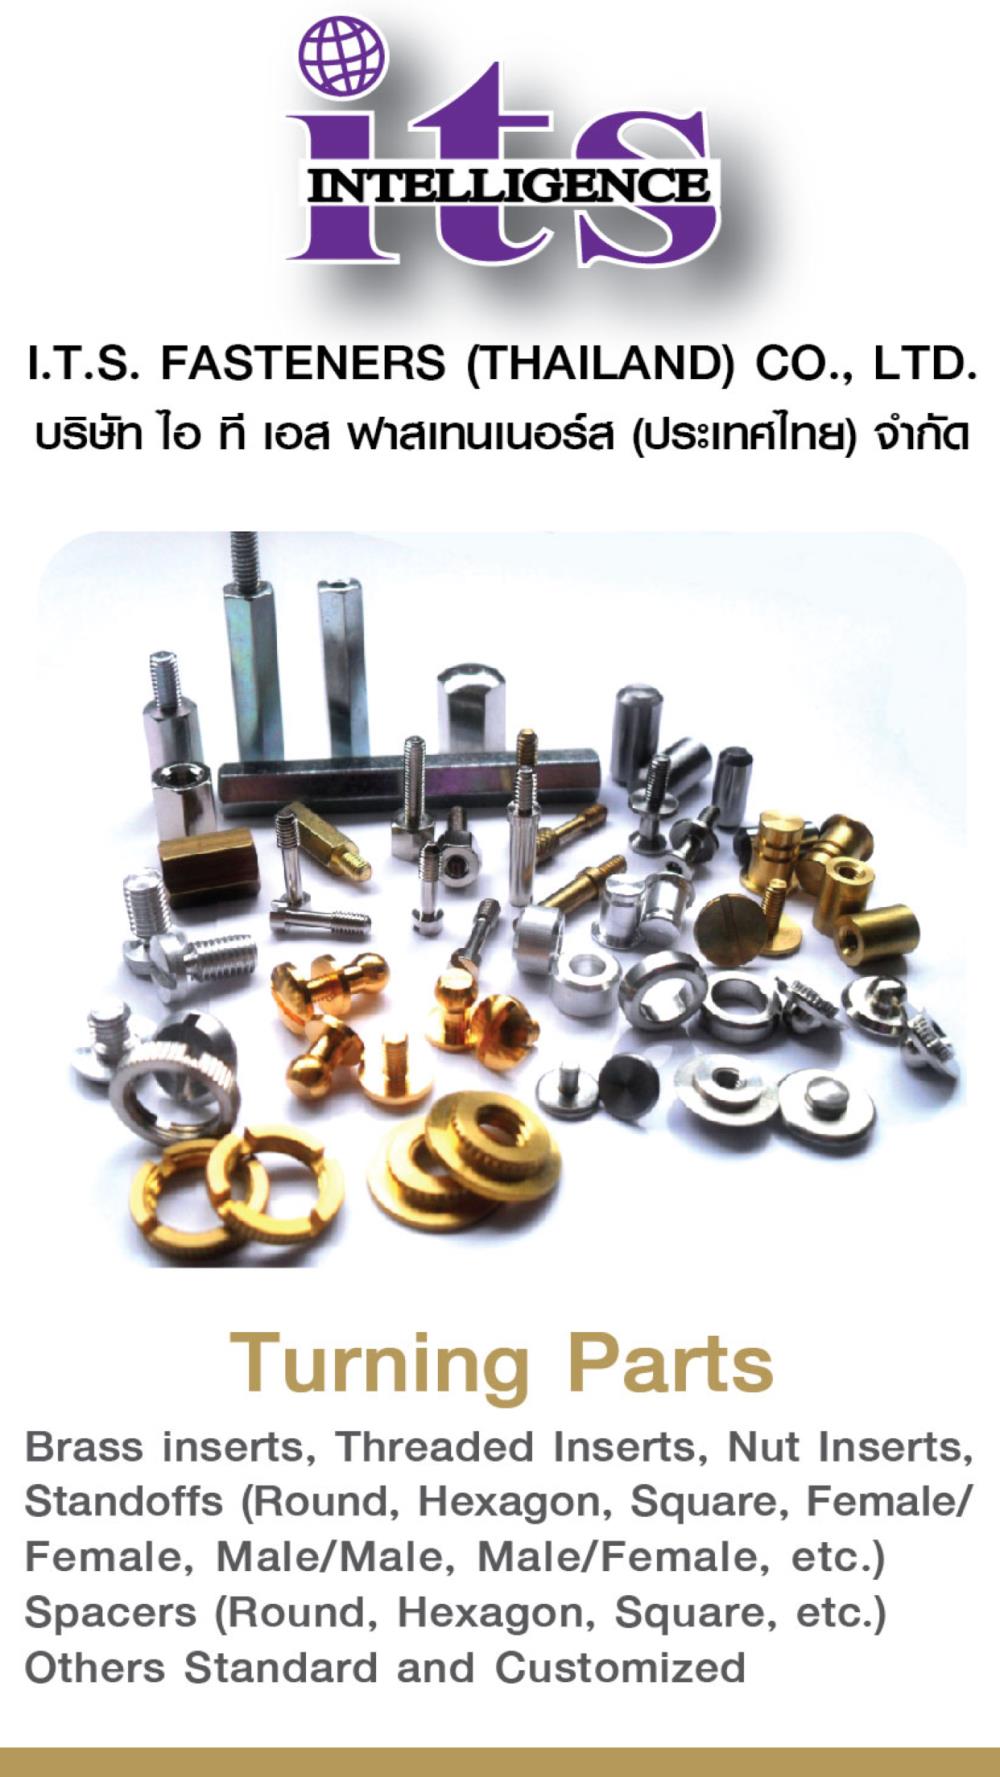 Machine Turning Parts , งานกลึง ชนิดต่าง ๆ,Machine Turning Parts , งานกลึง ชนิดต่าง ๆ,NO BRAND,Hardware and Consumable/Fasteners